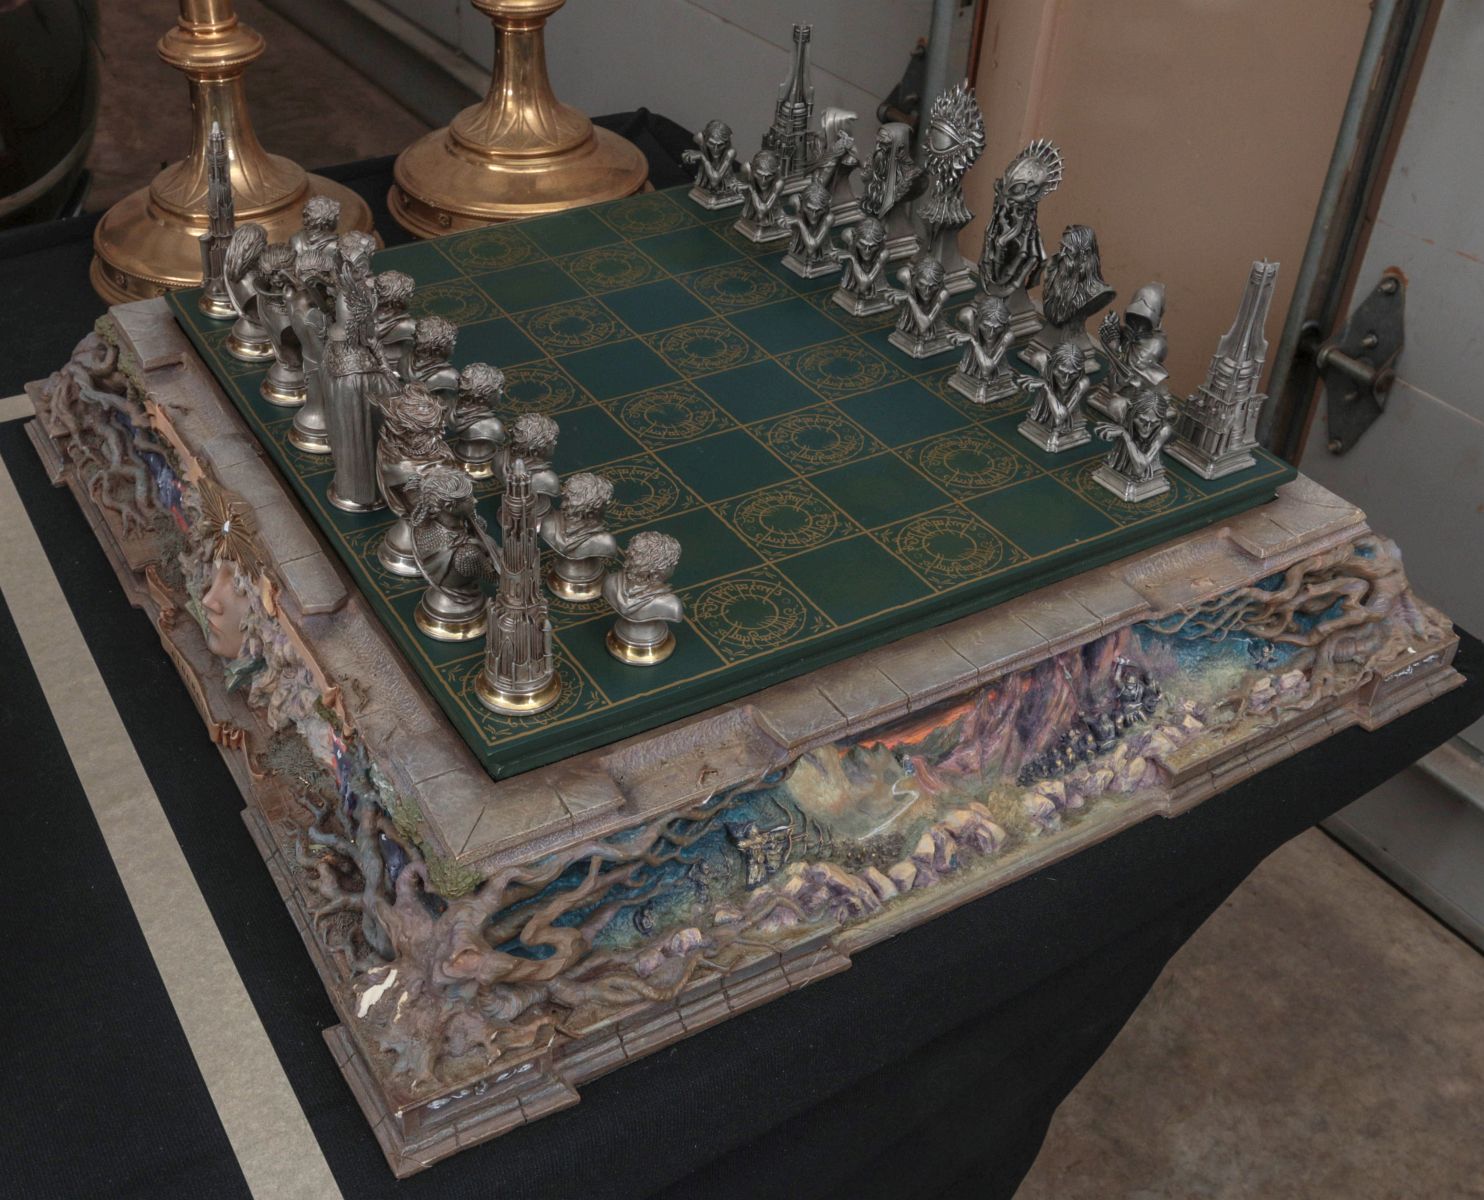 A LORD OF THE RINGS CHESS SET AND BOARD